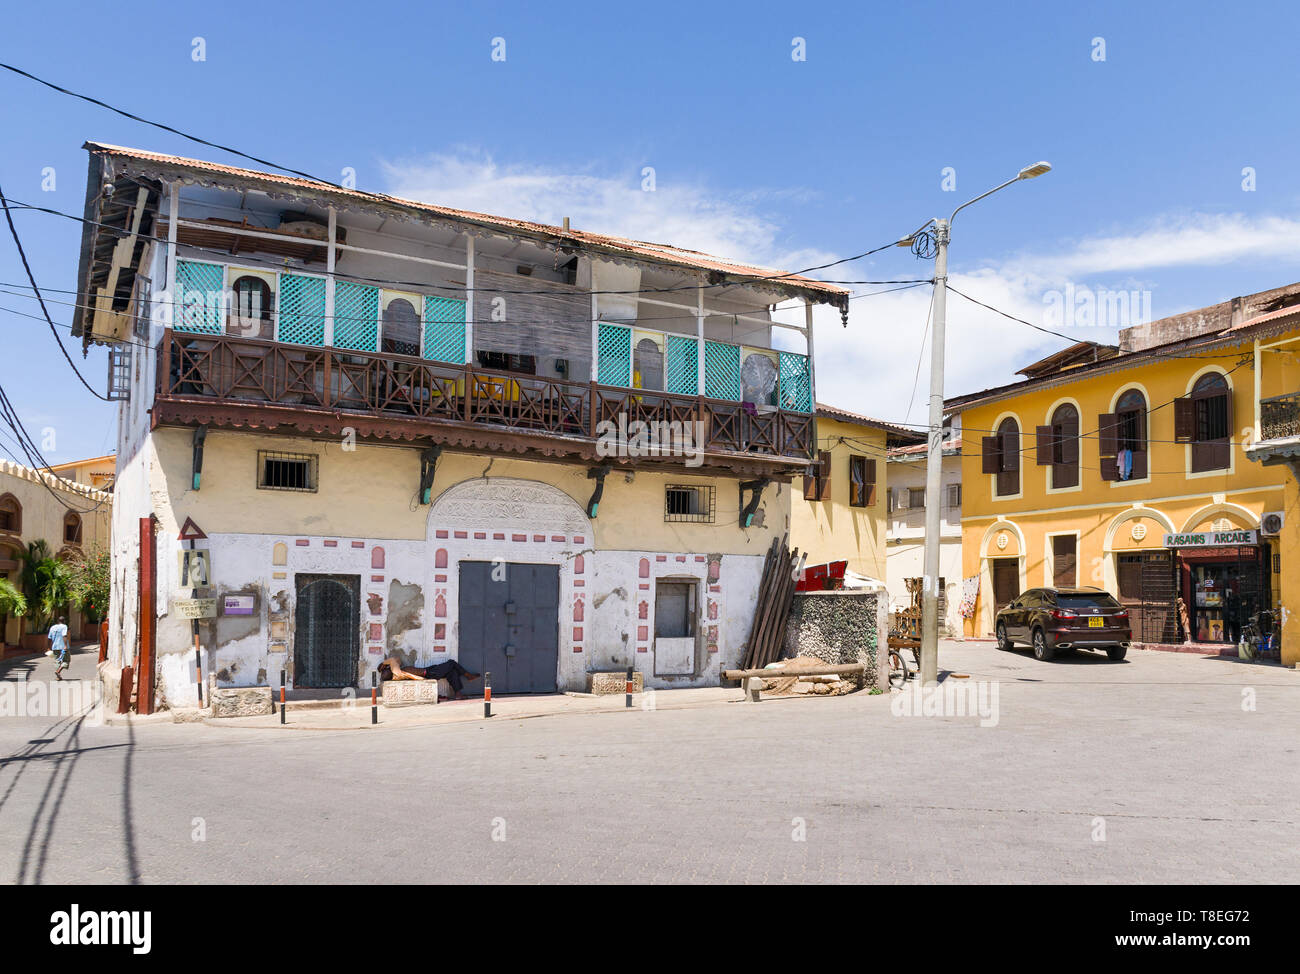 The Old Post House building exterior on a sunny afternoon, Mombasa Old town, Kenya Stock Photo